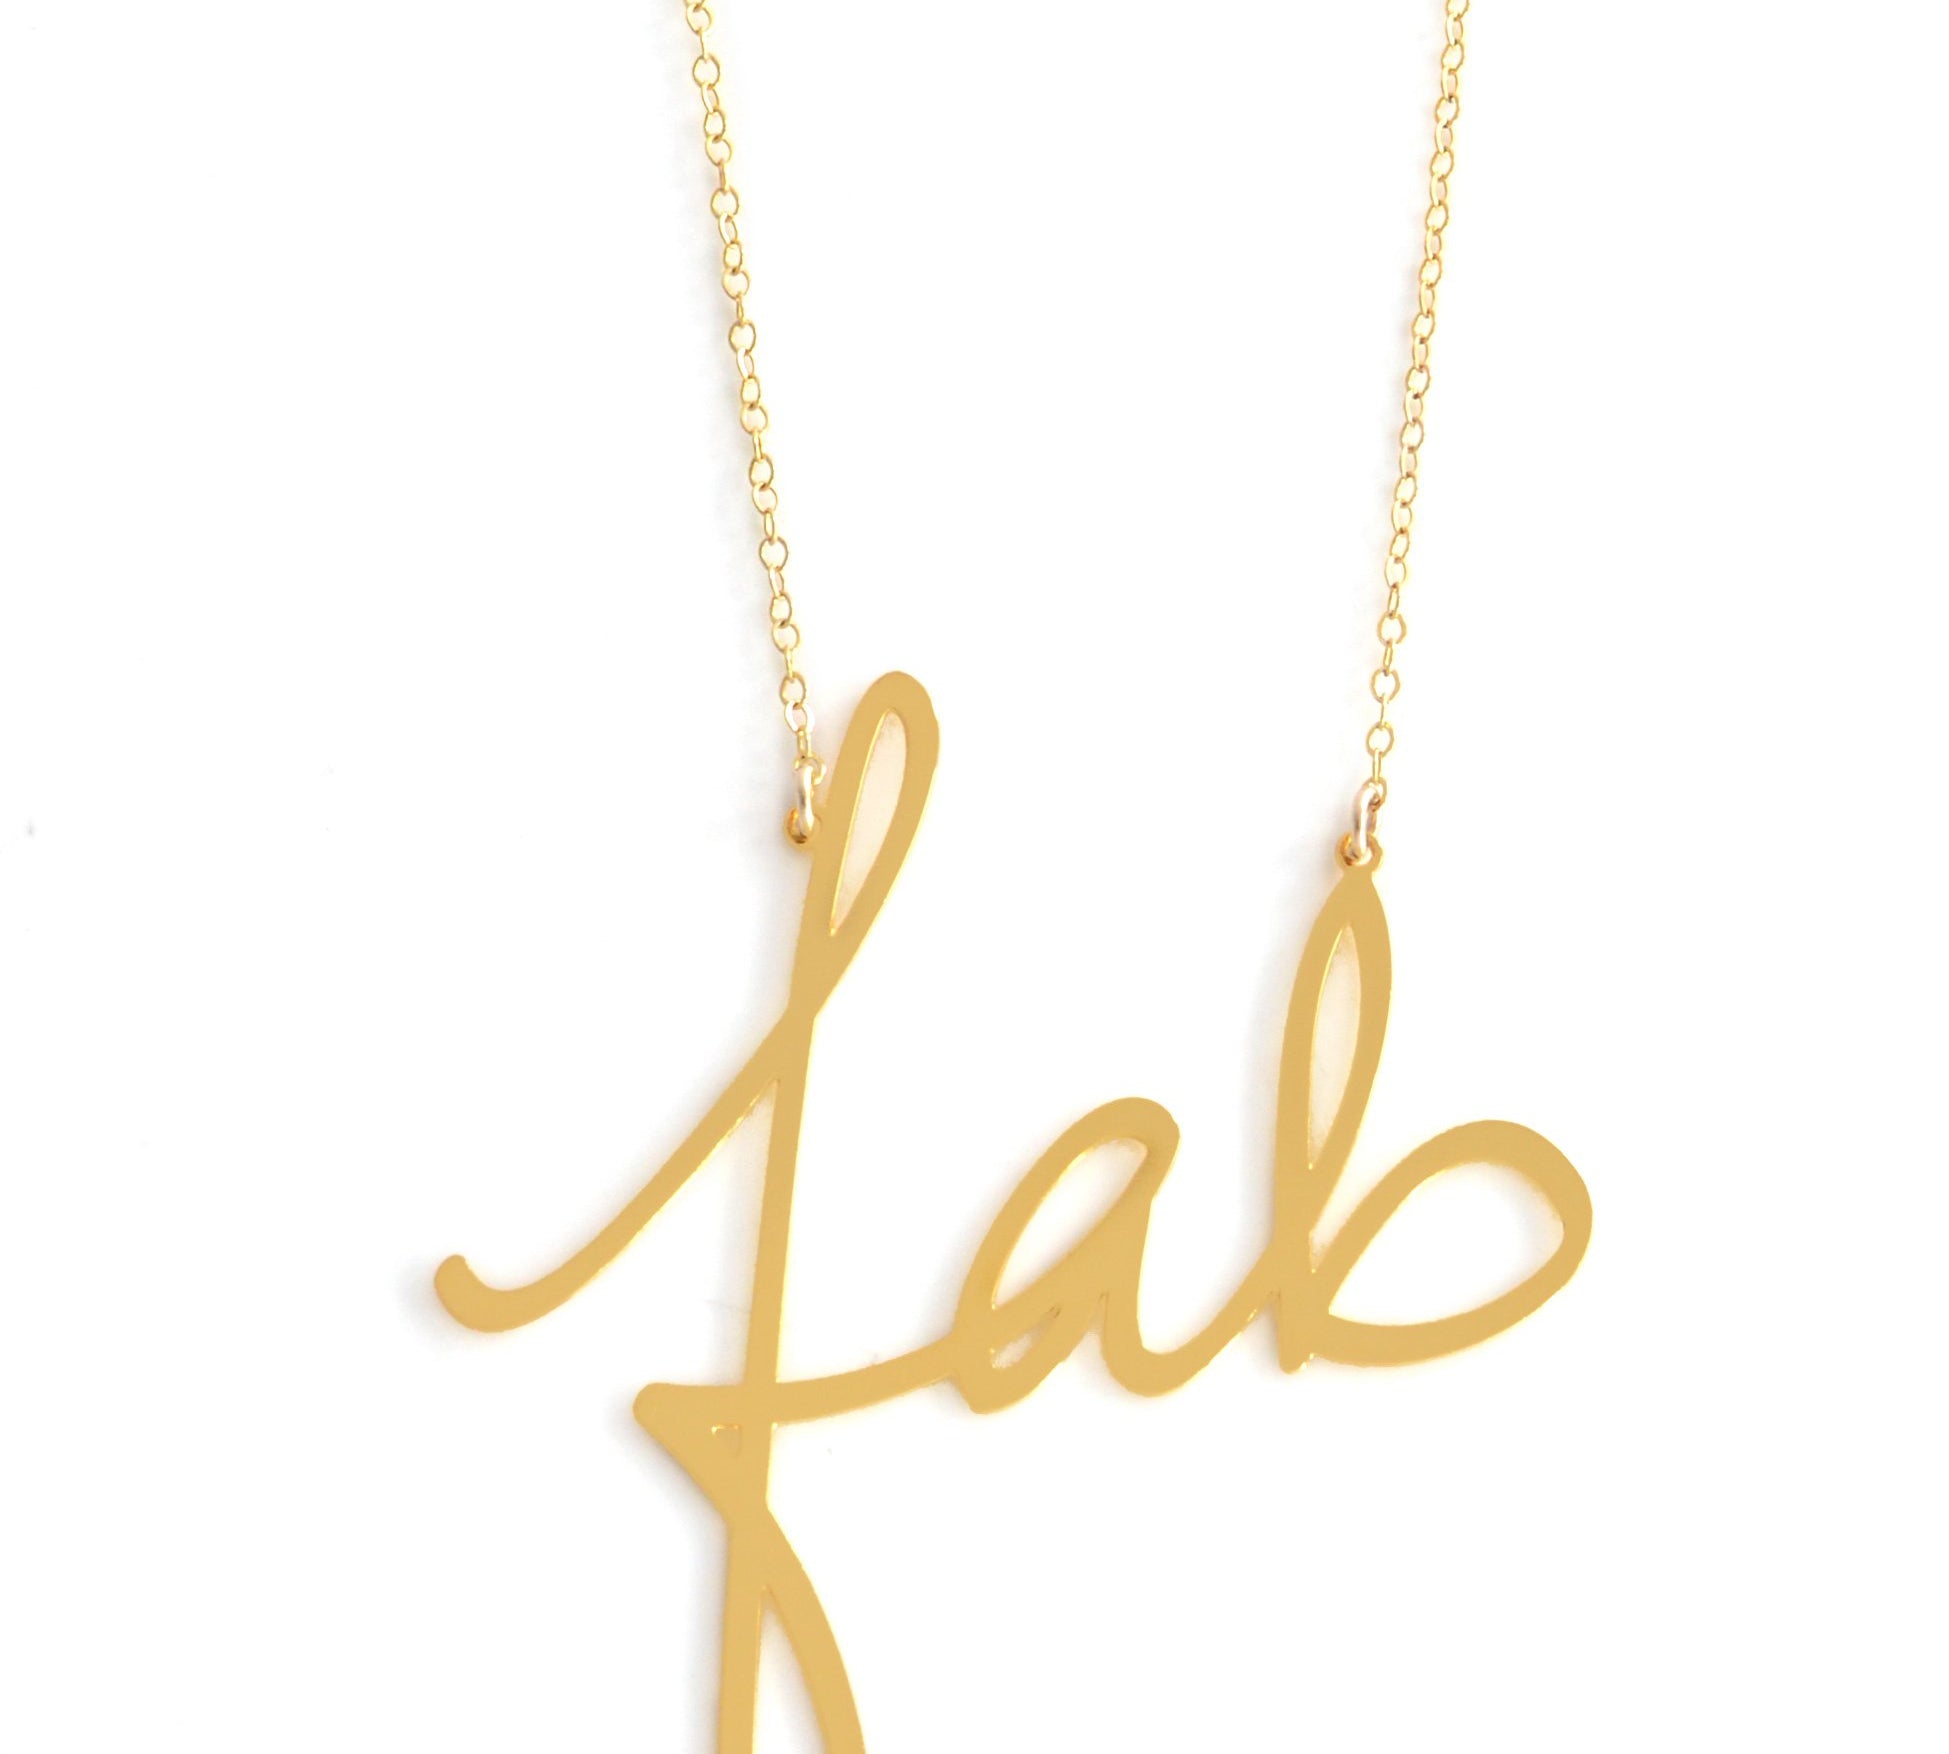 Fab Necklace - High Quality, Affordable, Hand Written, Self Love, Mantra Word Necklace - Available in Gold and Silver - Small and Large Sizes - Made in USA - Brevity Jewelry